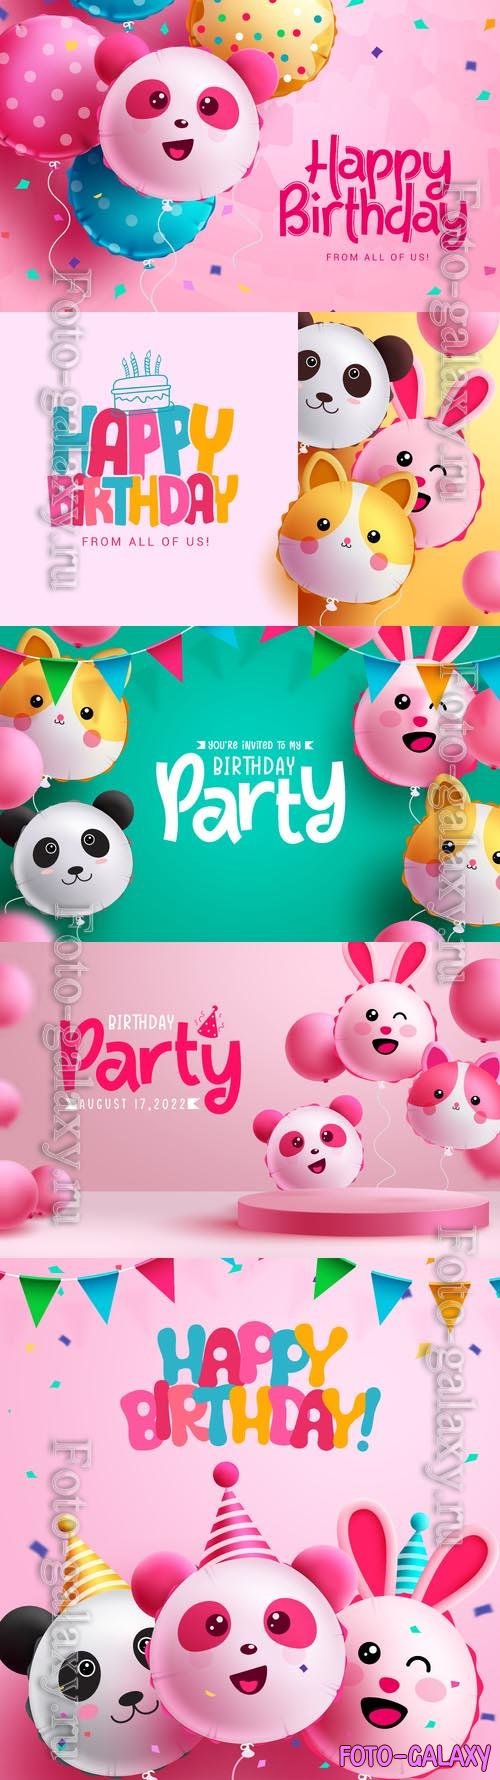 Happy birthday greeting vector design, birthday character panda balloon elements for kids party